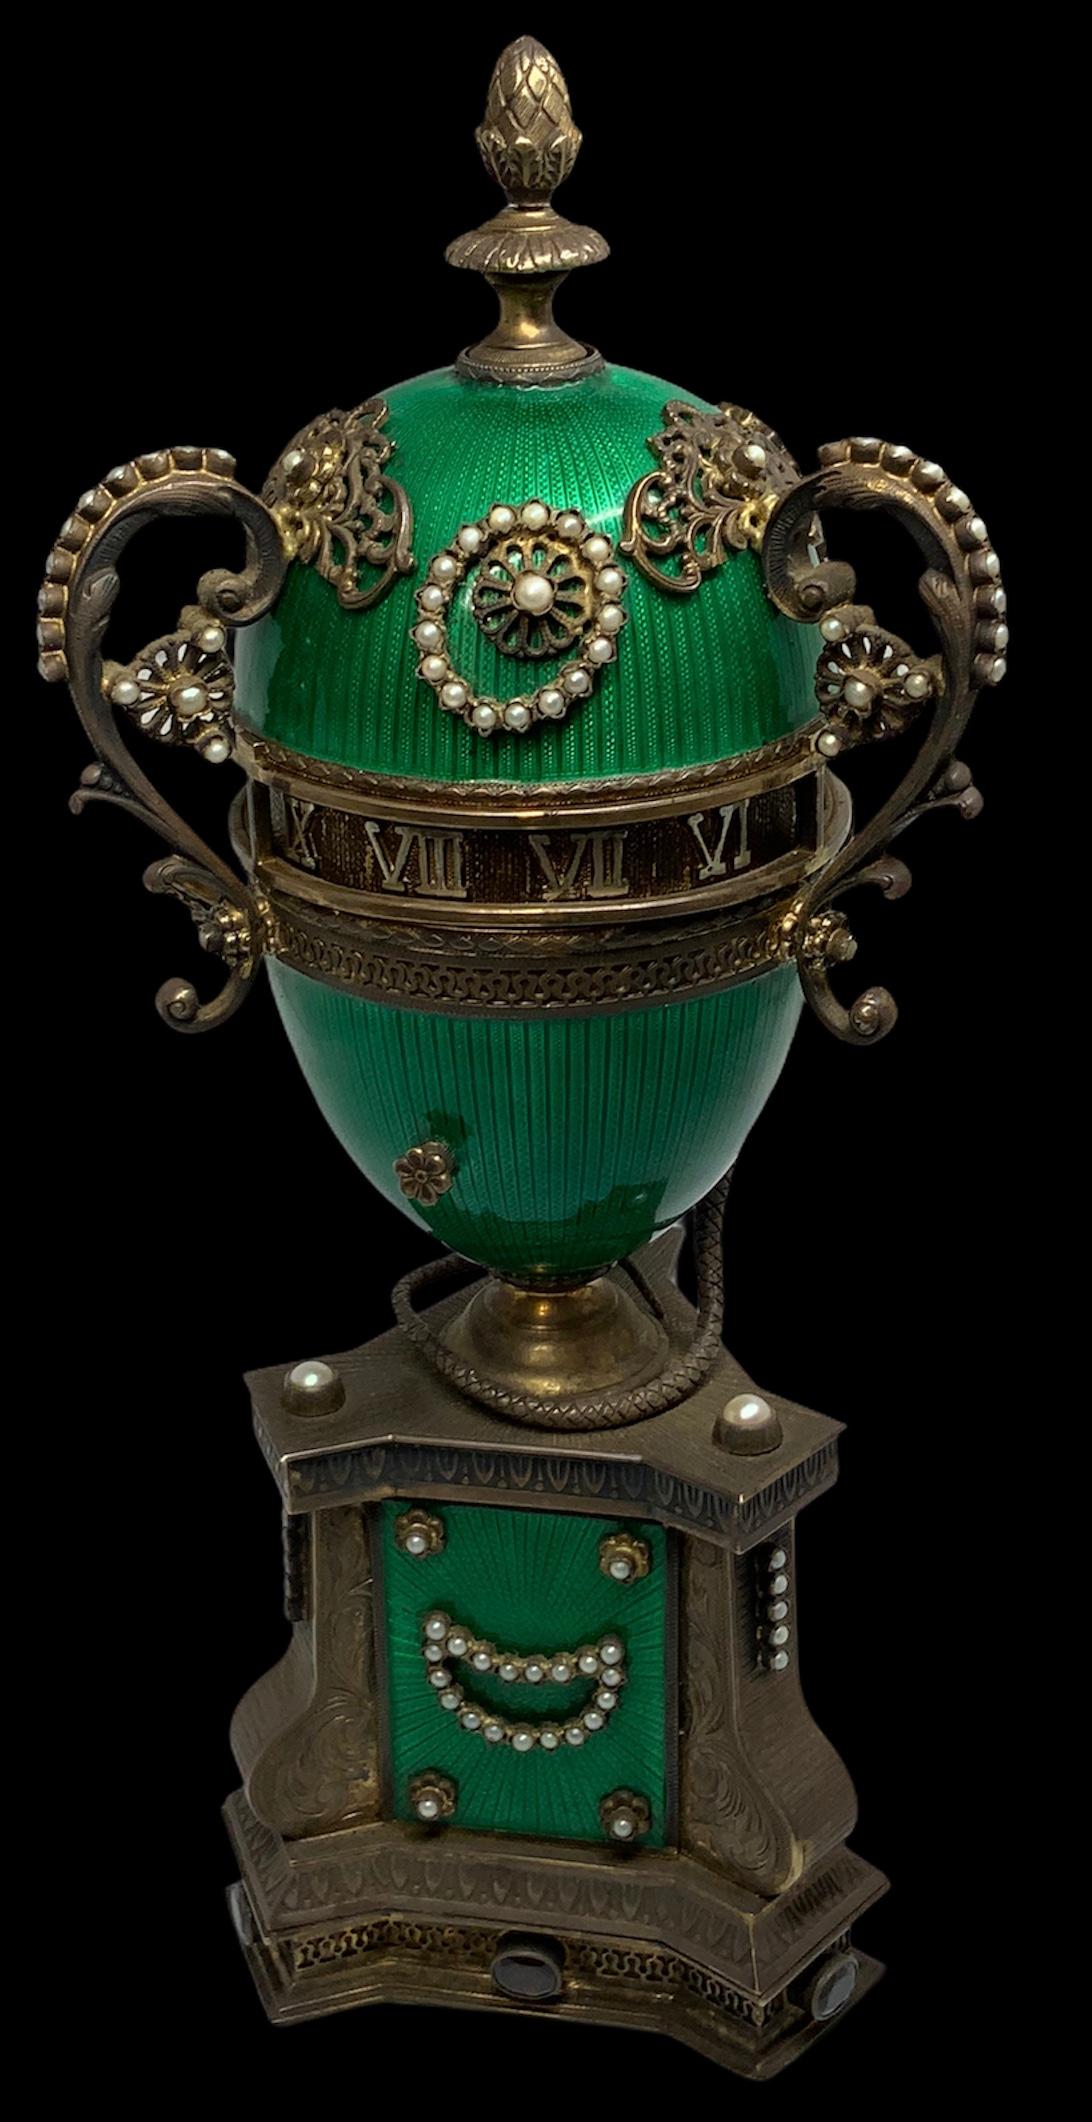 An emerald color guilloche egg adorned with decorative silver flowers and three scrolls handles of acanthus leaves encrusted with cultured pearls. A serpent is coil around the bottom base of the egg and his garnet head/tongue pointing to the hour.